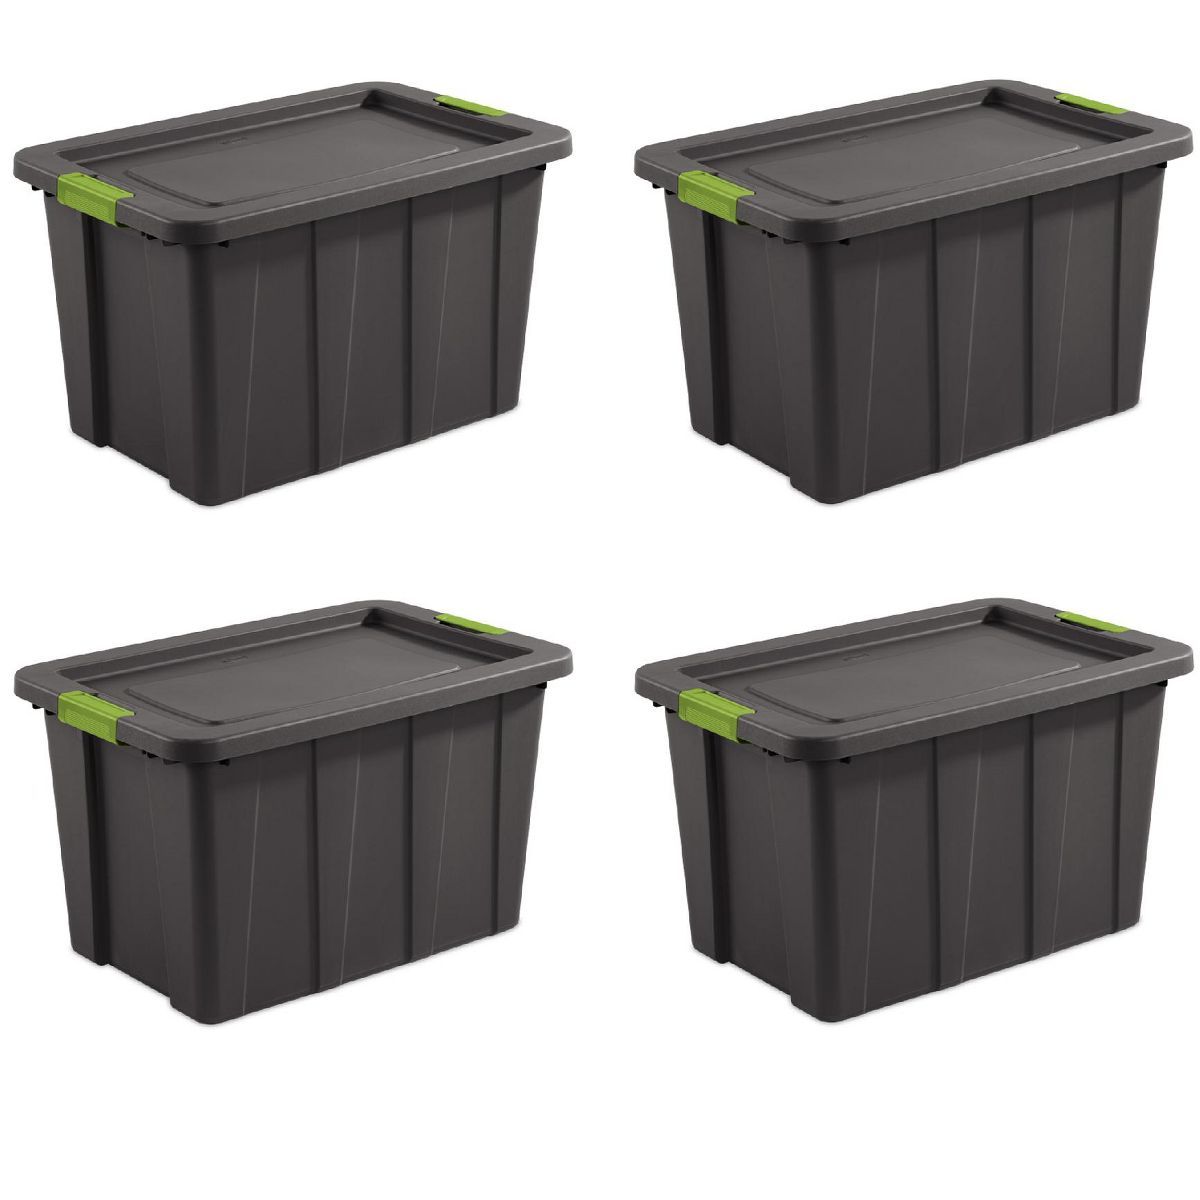 Sterilite Tuff1 Latching 30 Gal Plastic Storage Tote Container and Lid | Target